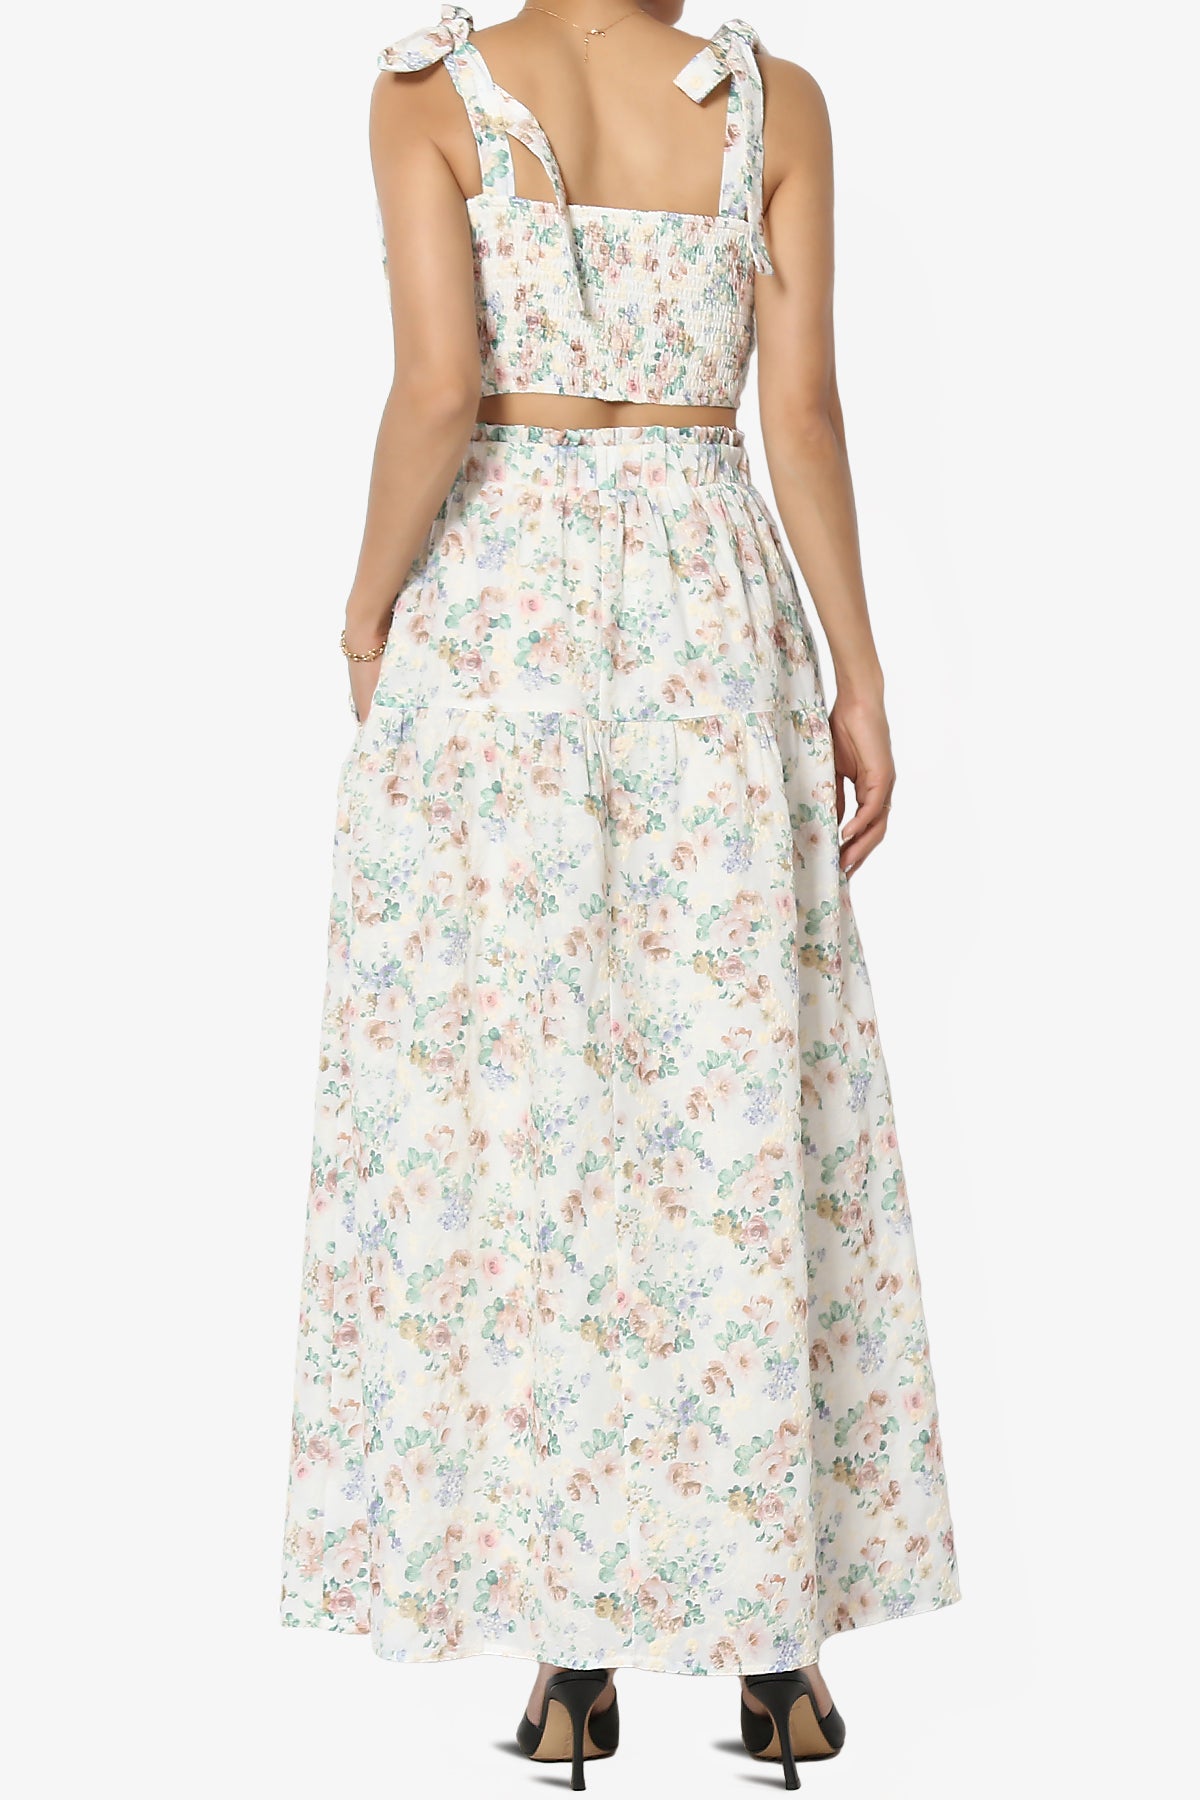 Twice Floral Ruffle Crop Top & A-Line Skirt Set in Taupe